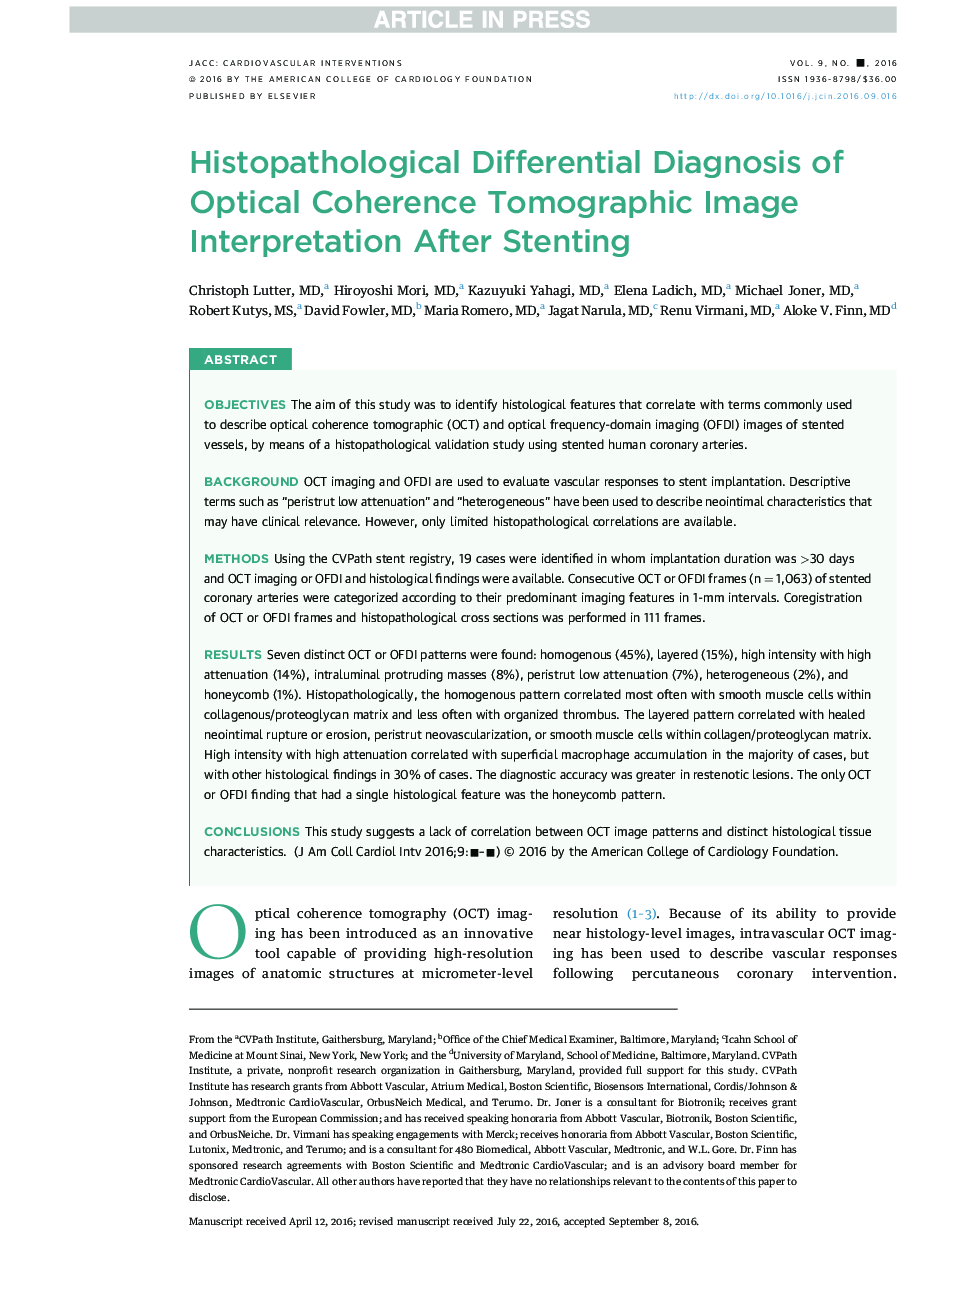 Histopathological Differential Diagnosis ofÂ Optical Coherence Tomographic ImageÂ Interpretation After Stenting